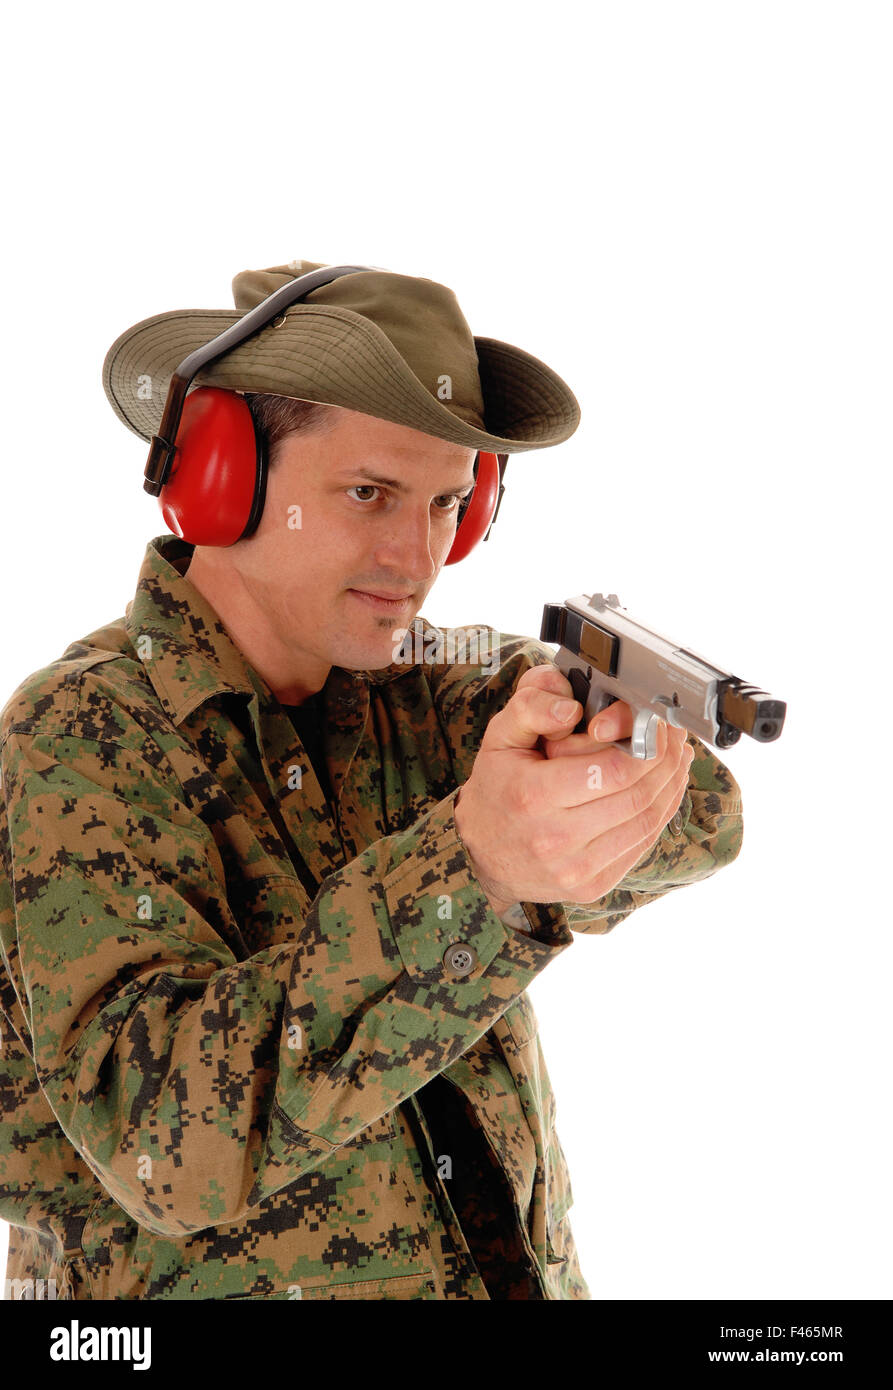 Soldier pointing a pistol. Stock Photo